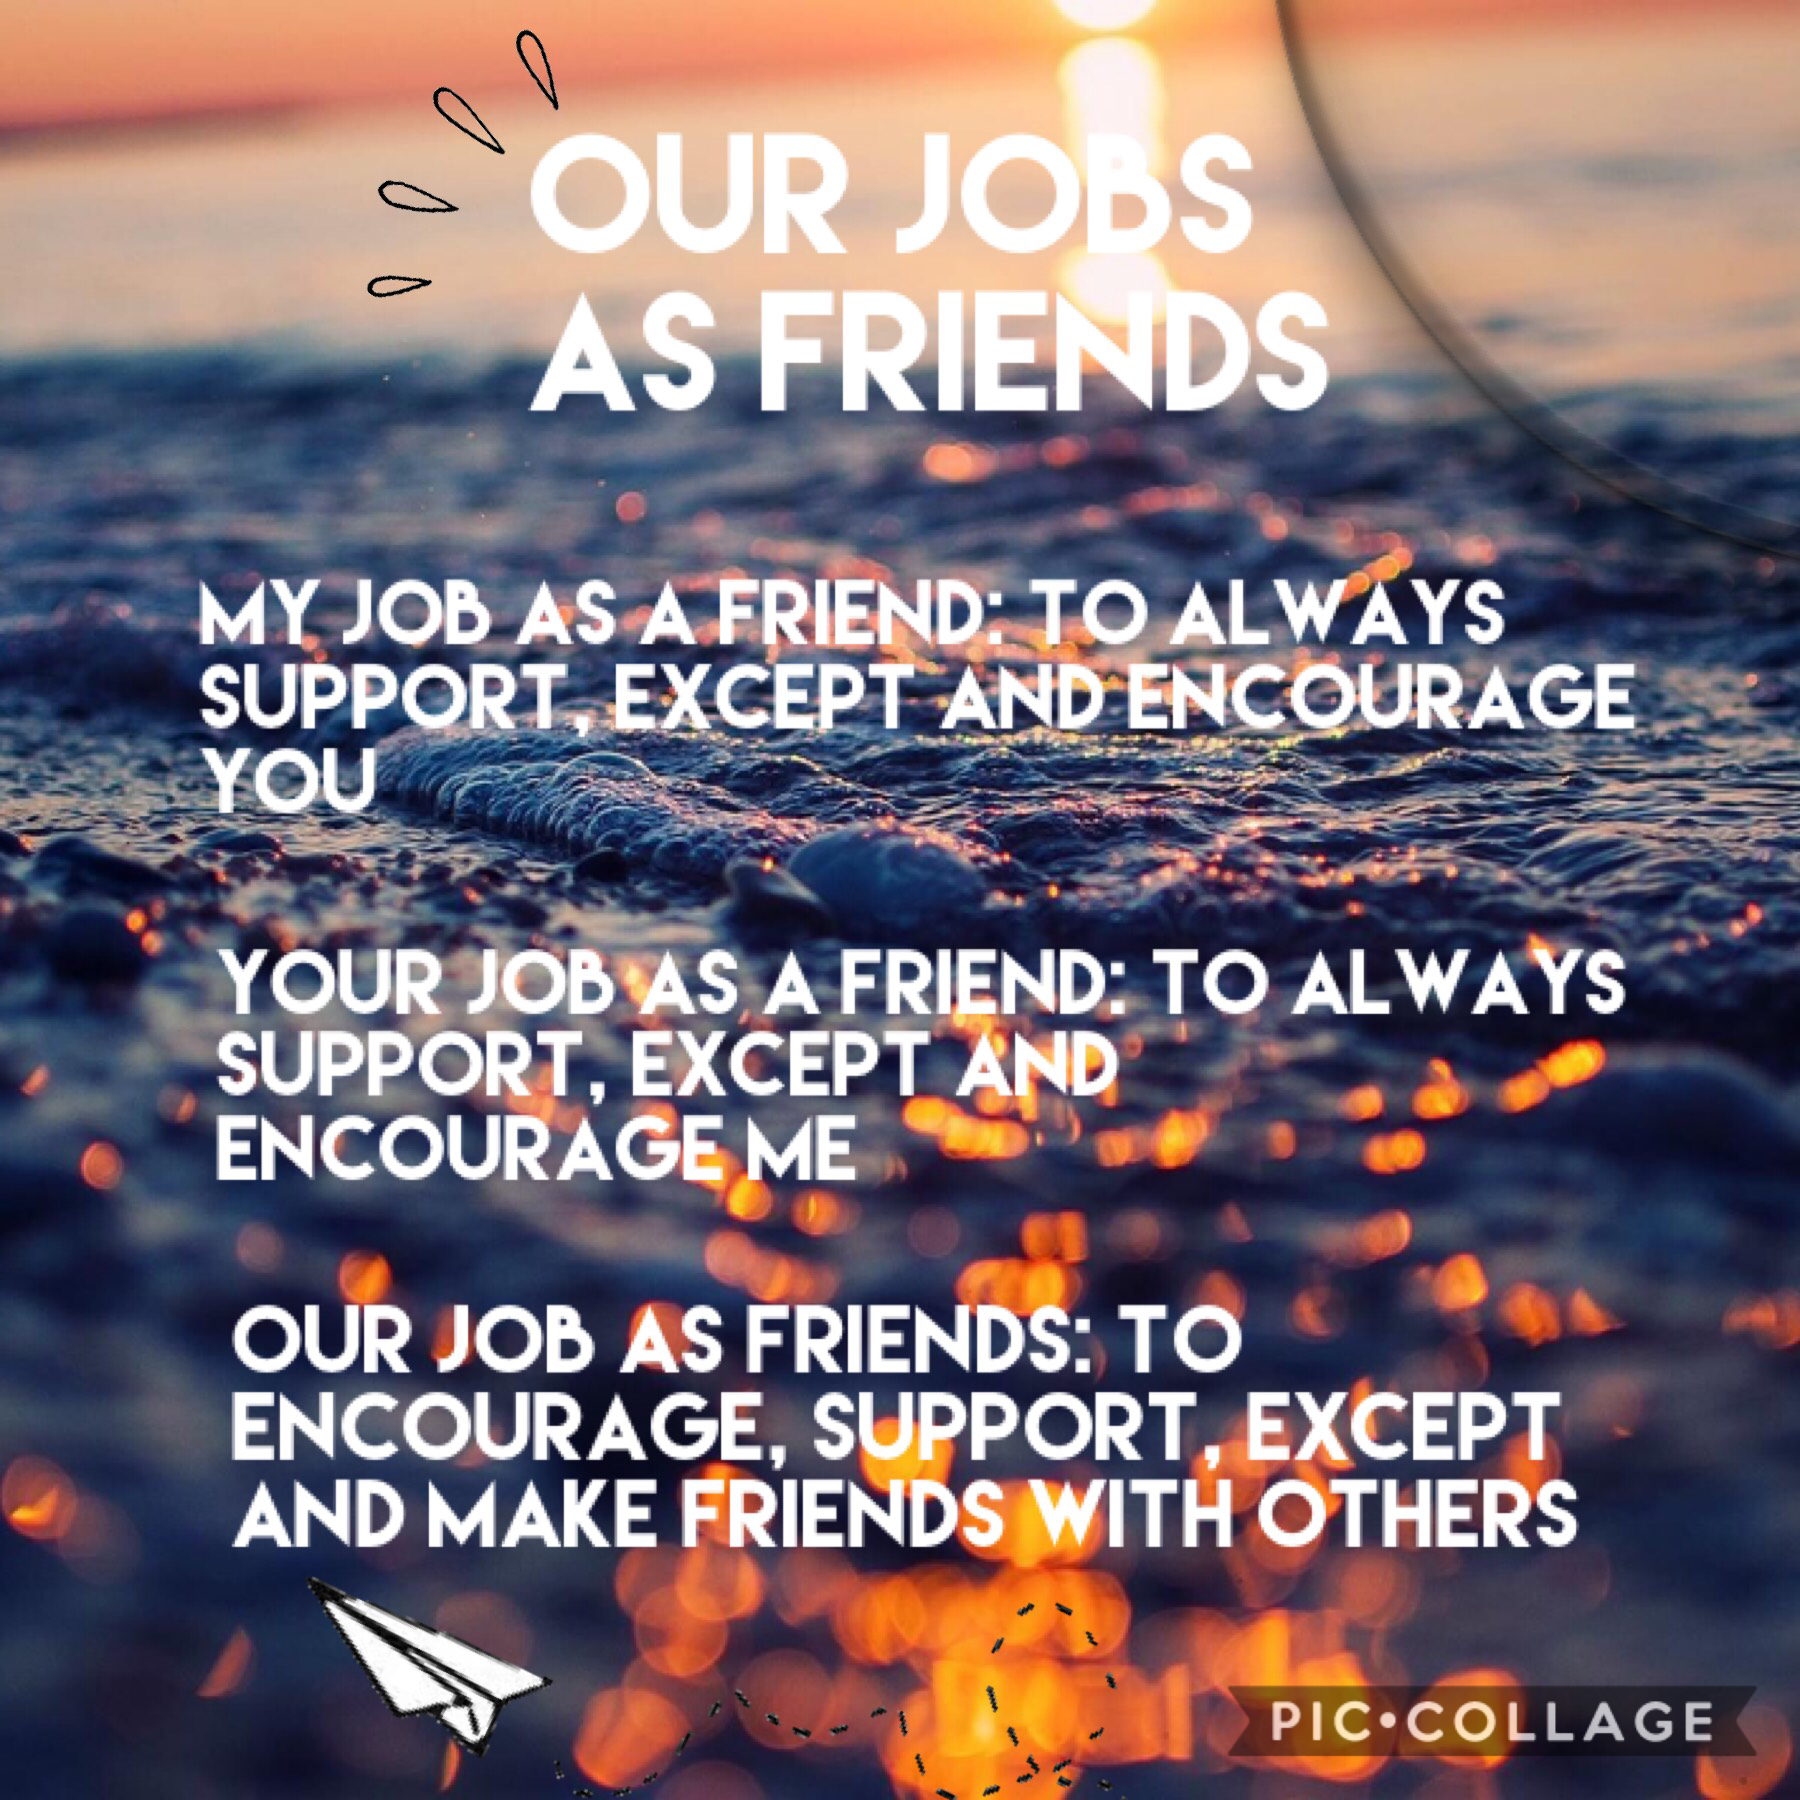 Friend all have important jobs